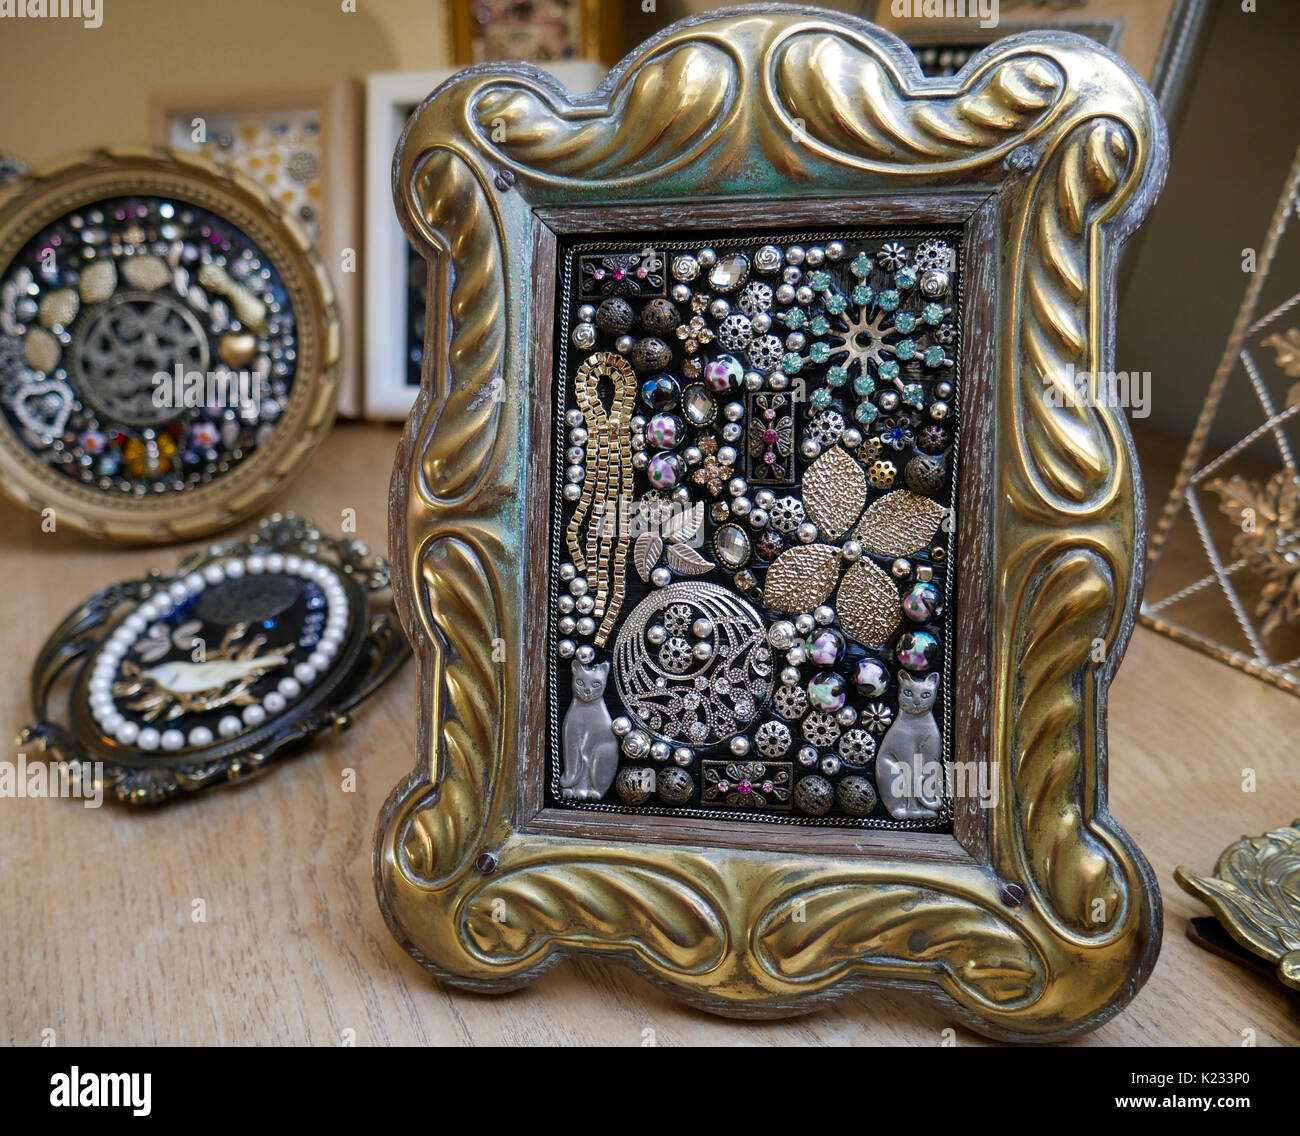 Collection of handmade jewellery mosaics in vintage frames on old oak chest Stock Photo